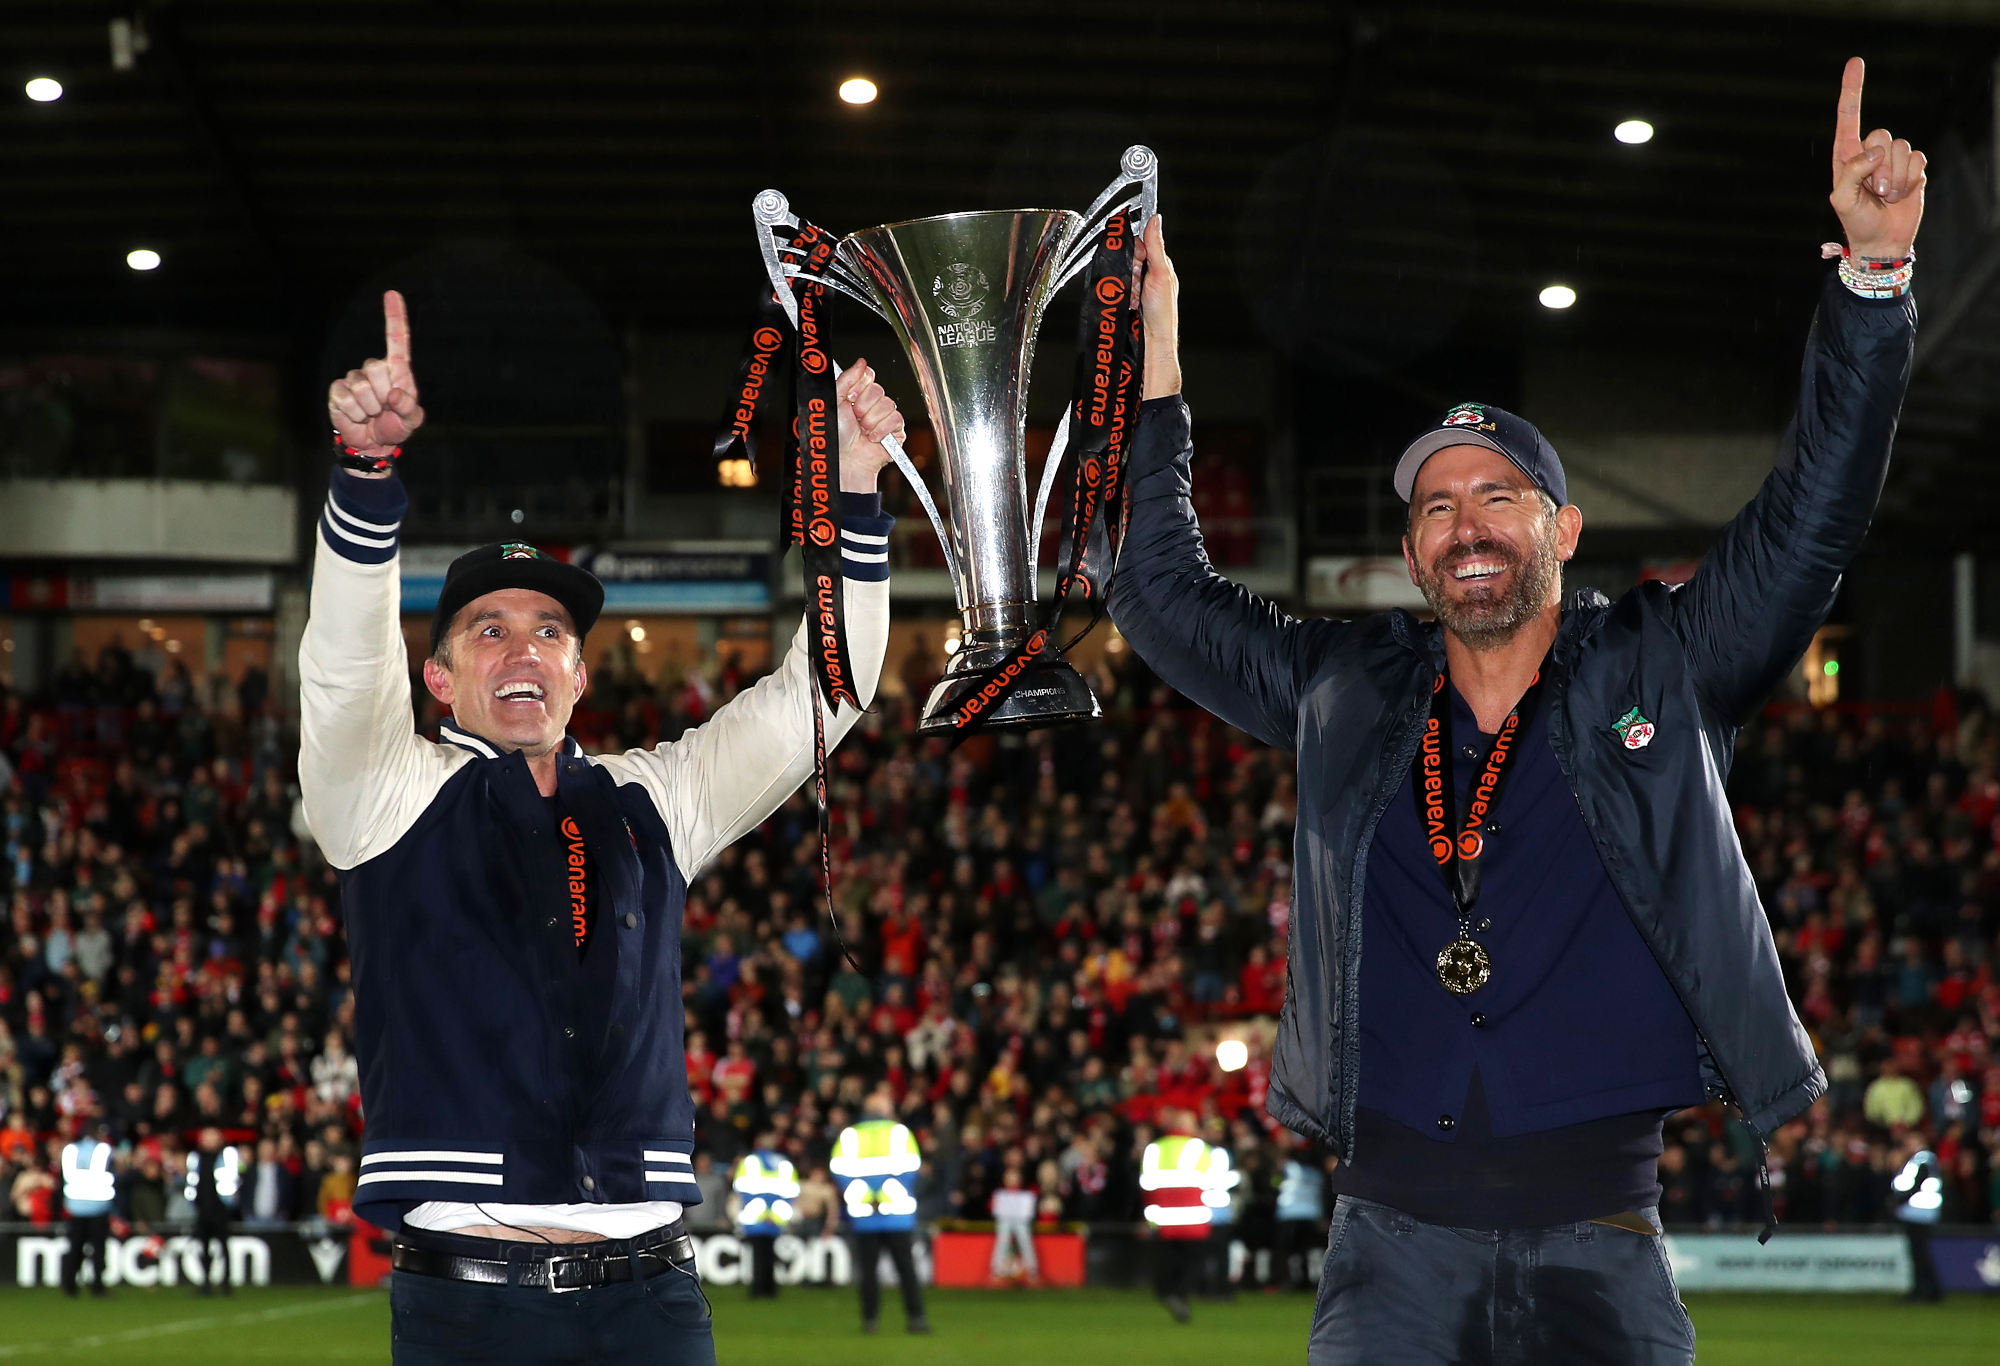 Rob McElhenney and Ryan Reynolds, owners of Wrexham, celebrate with the Vanarama National League trophy.